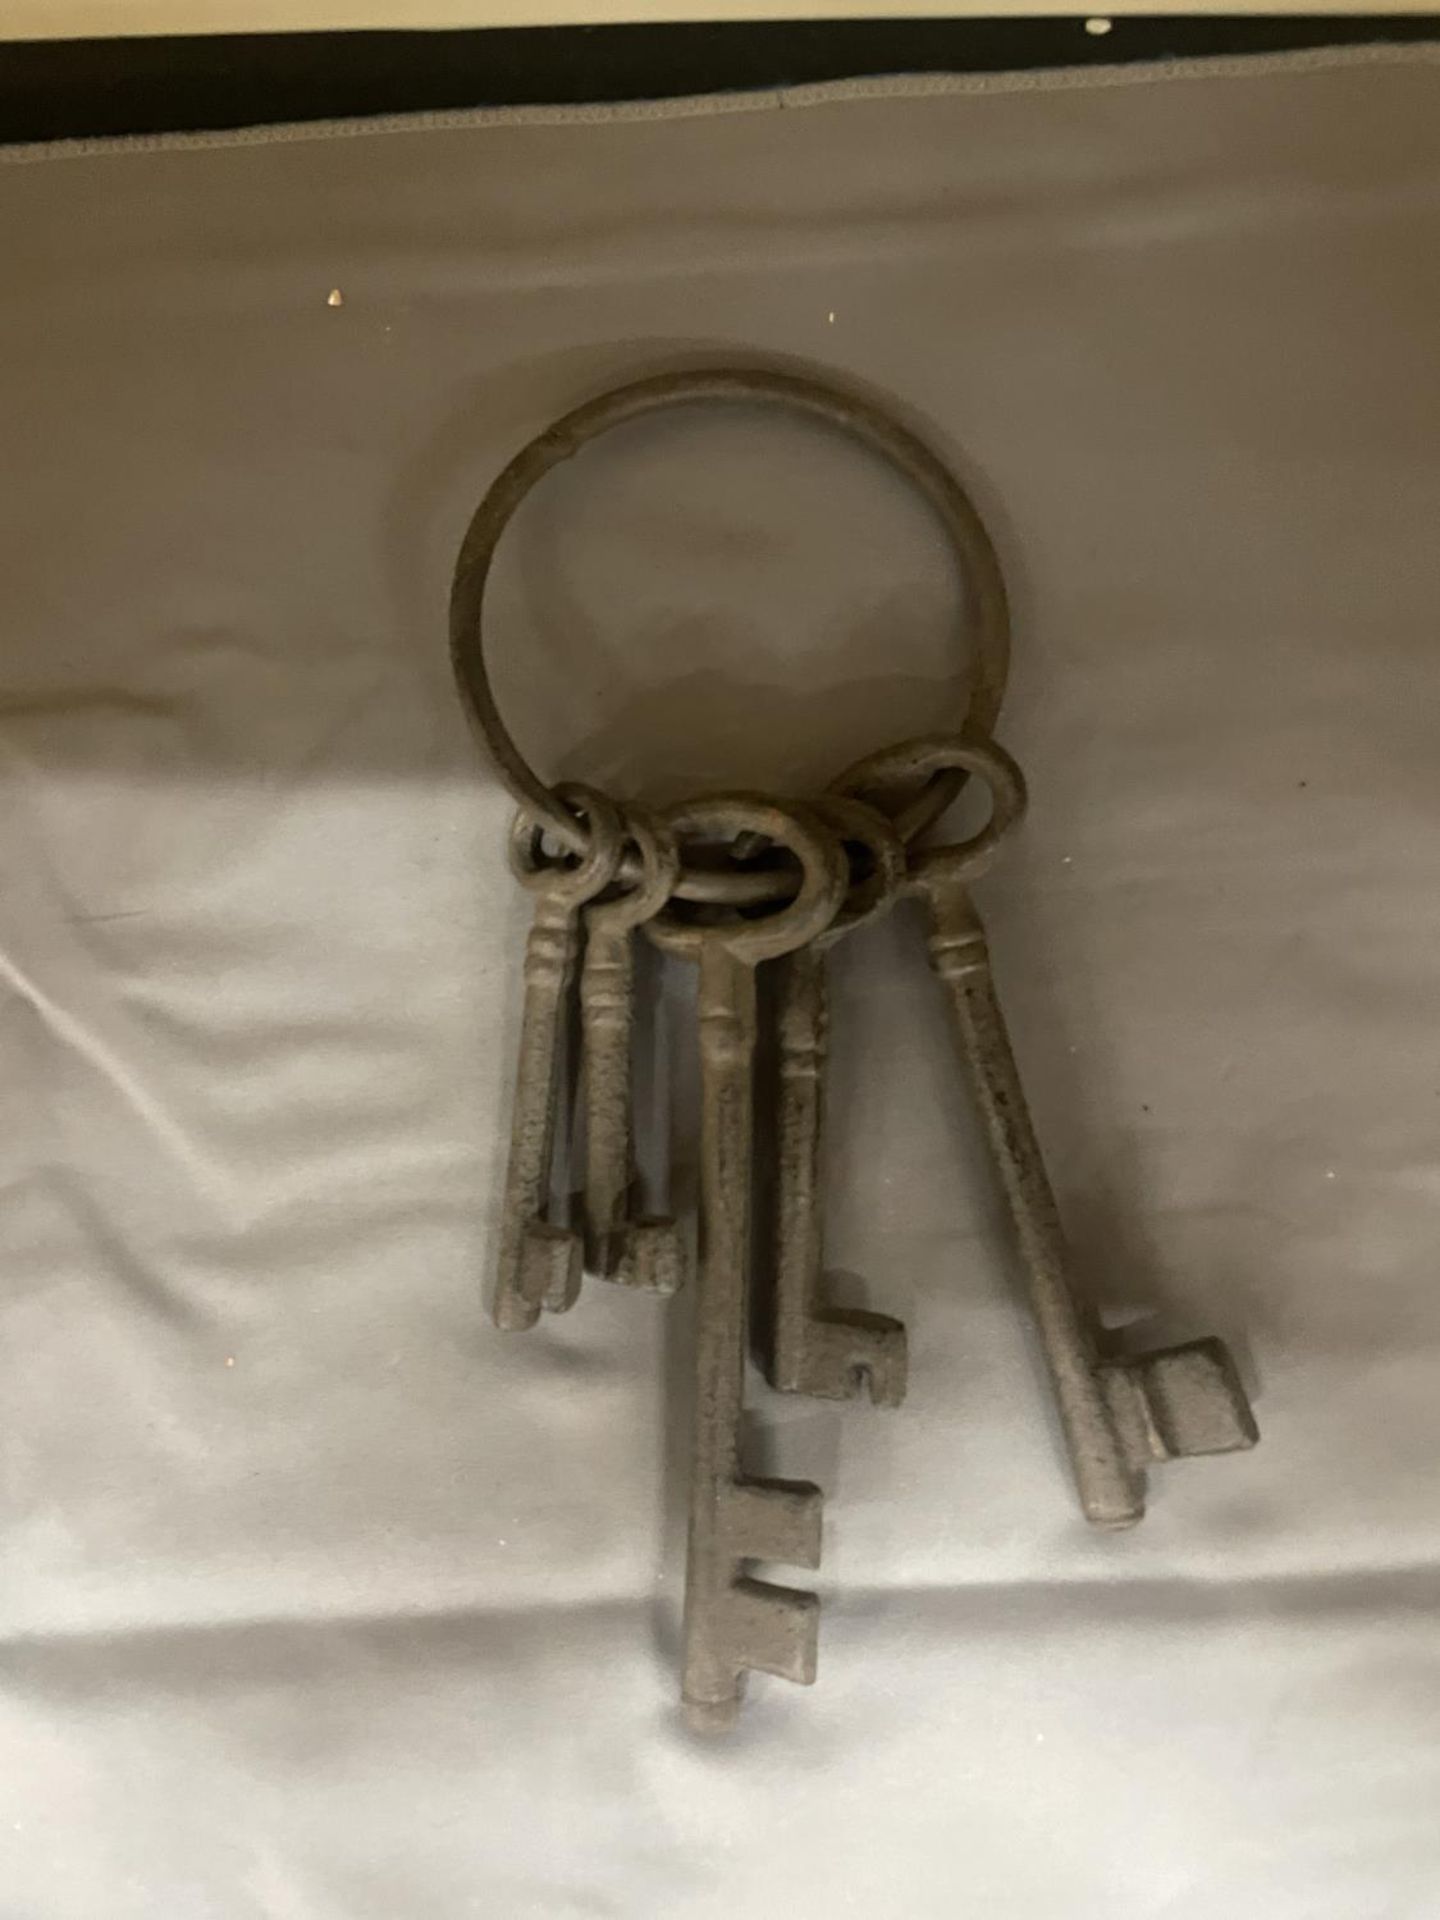 A SET OF FIVE LARGE CAST KEYS ON A LARGE RING - Image 2 of 2